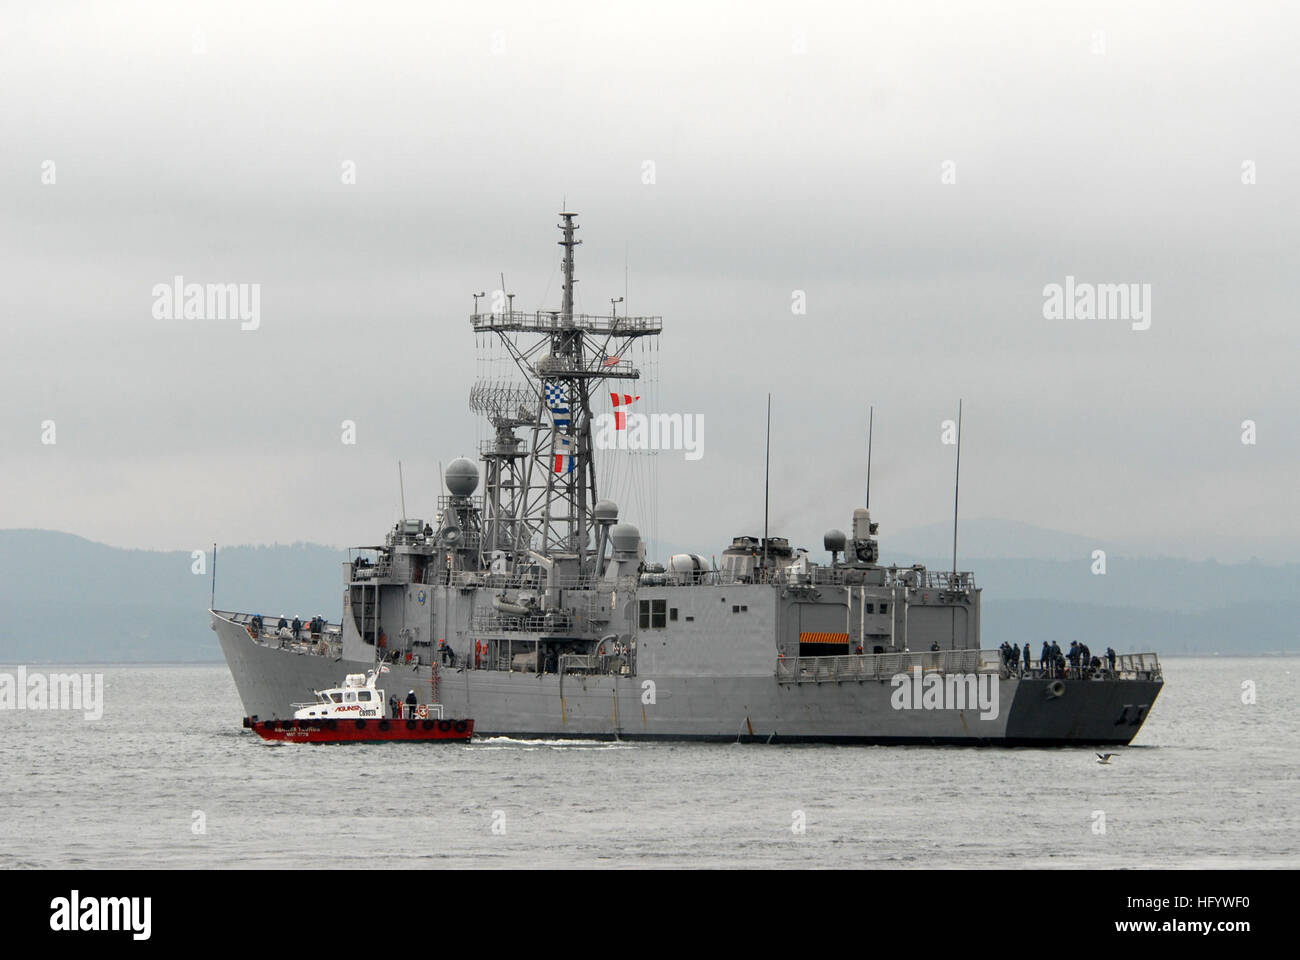 110616-N-ZI300-036 TALCAHUANO, Chile (June 16, 2011) The Guided-missile frigate USS Thach (FFG 43) departs Talcahuano, Chile, after a five-day visit. Thach was in port for multinational events including a community service project, a Project Handclasp delivery and ship's tours. Thach is deployed to South America supporting Southern Seas 2011. (U.S. Navy photo by Mass Communication Specialist 1st Class Steve Smith/Released) US Navy 110616-N-ZI300-036 The Guided-missile frigate USS Thach (FFG 43) departs Talcahuano, Chile, after a five-day visit Stock Photo